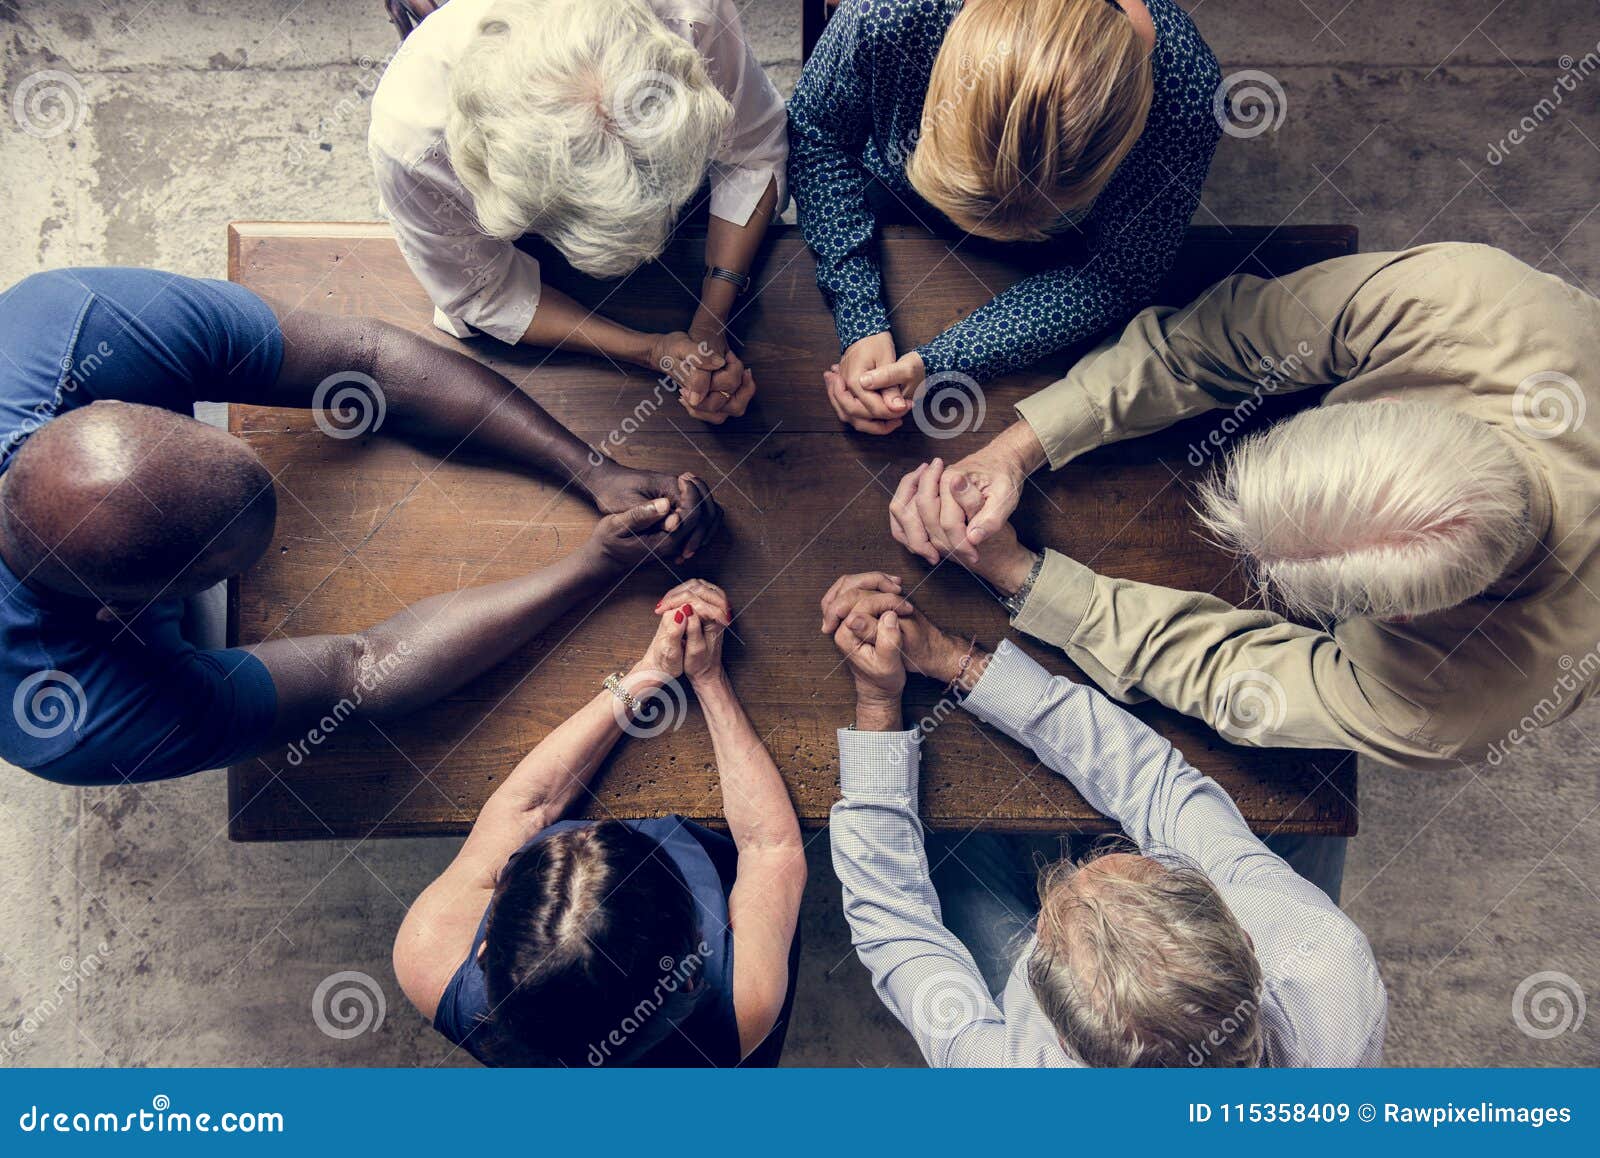 diverse religious people praying together